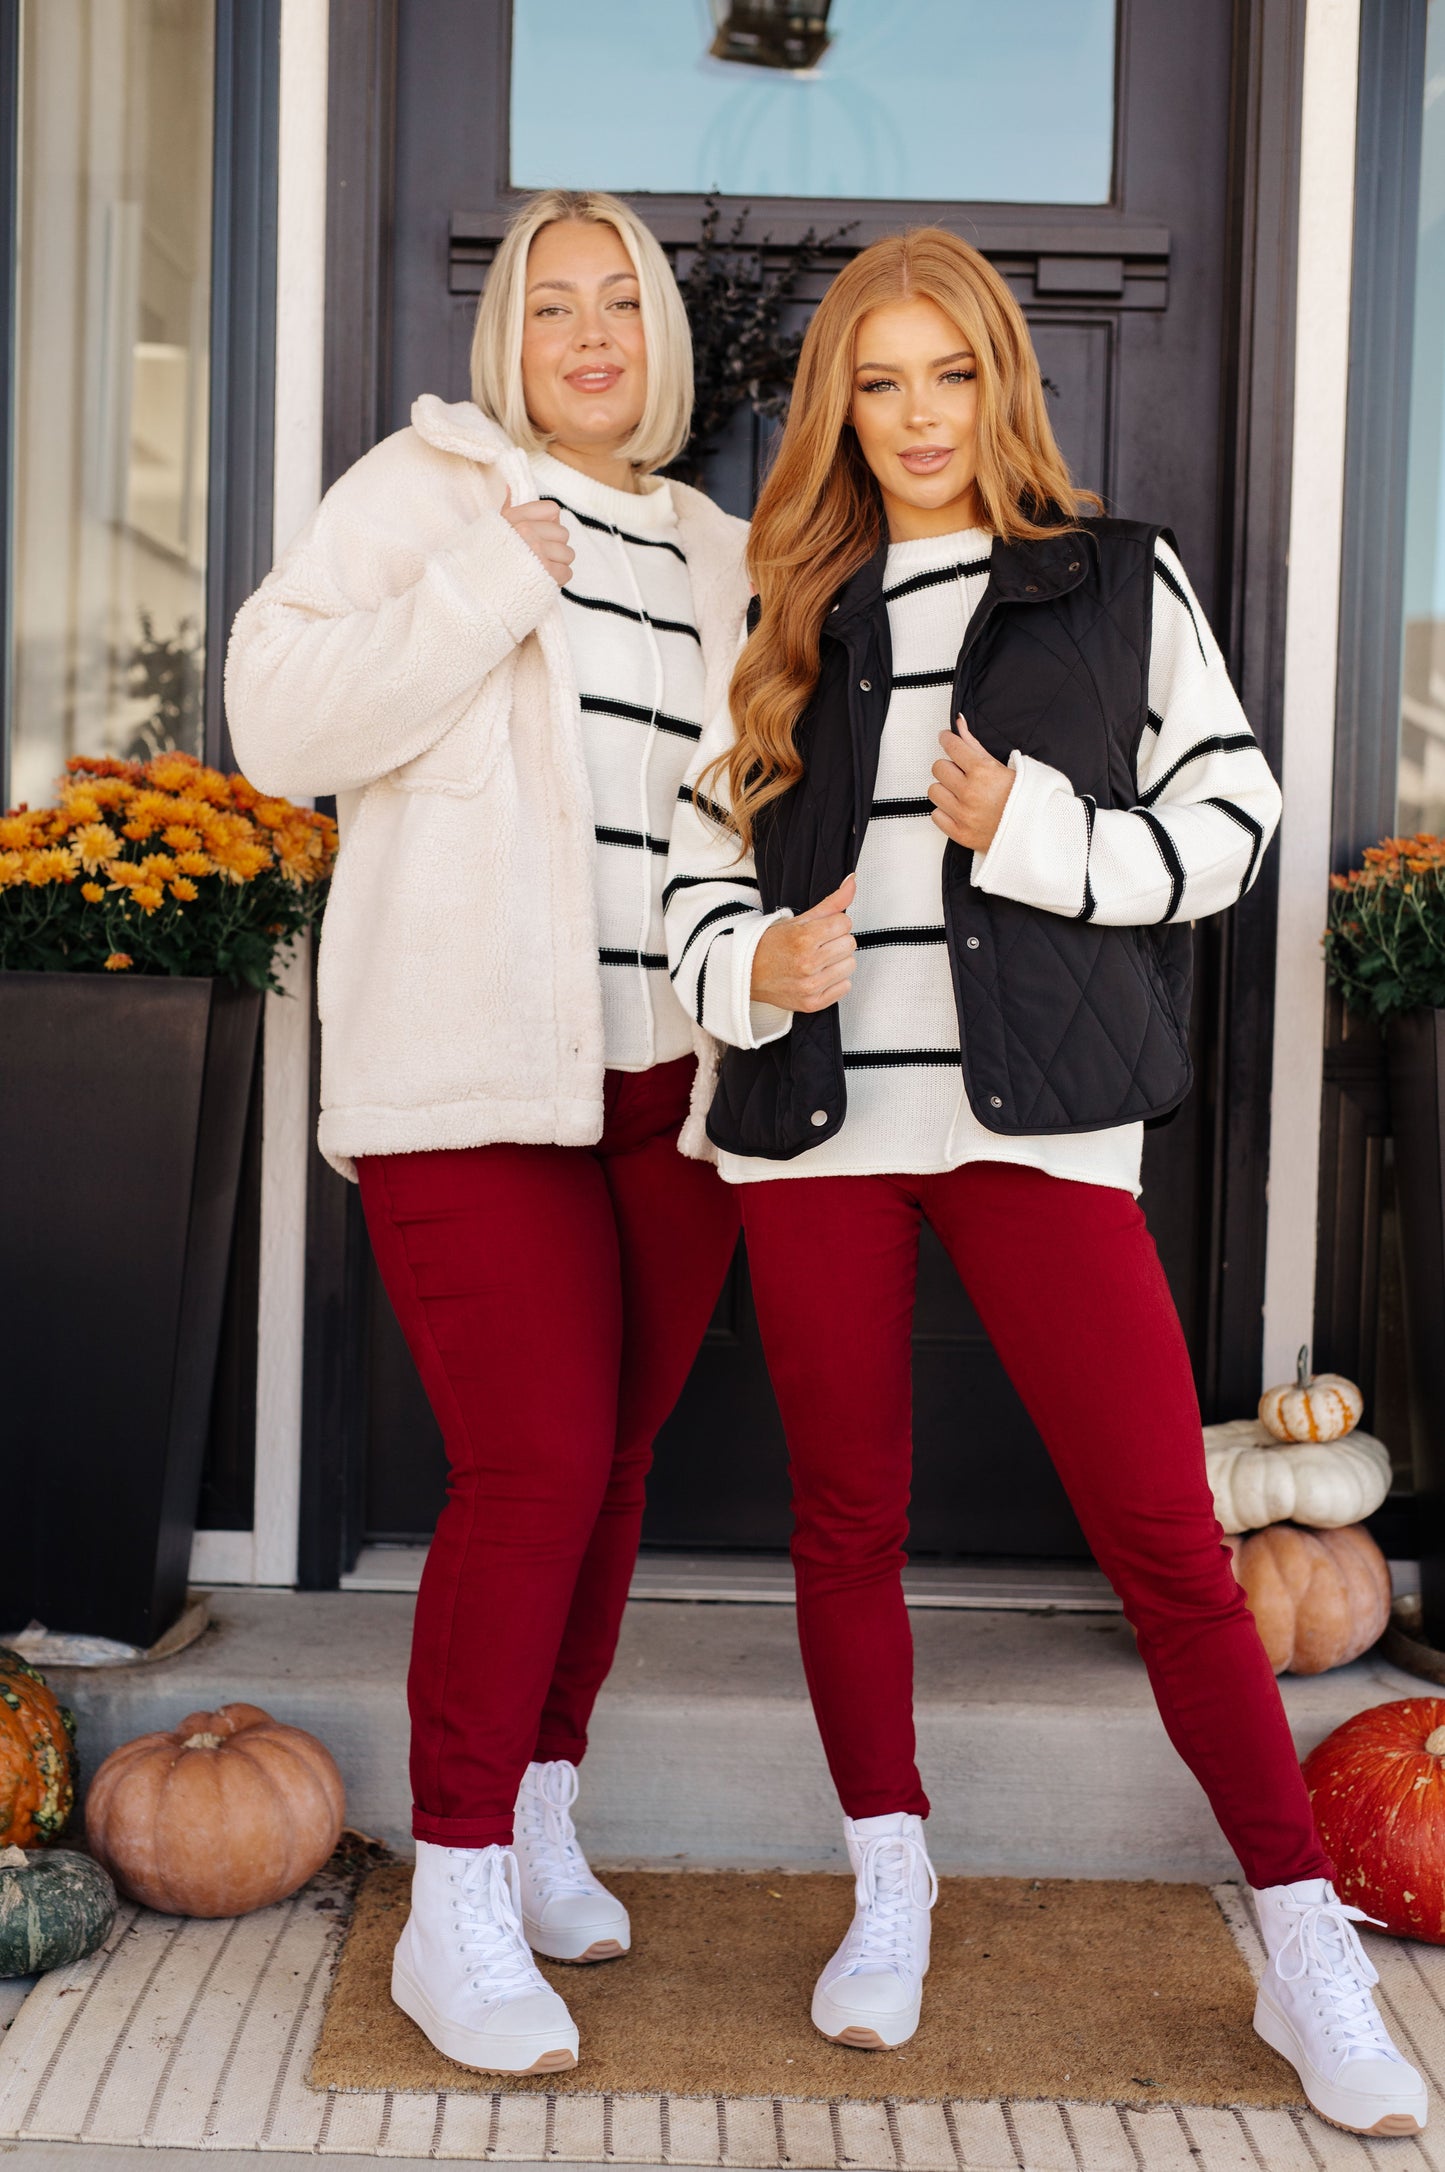 Plus Size More or Less Striped Sweater (Online Exclusive)